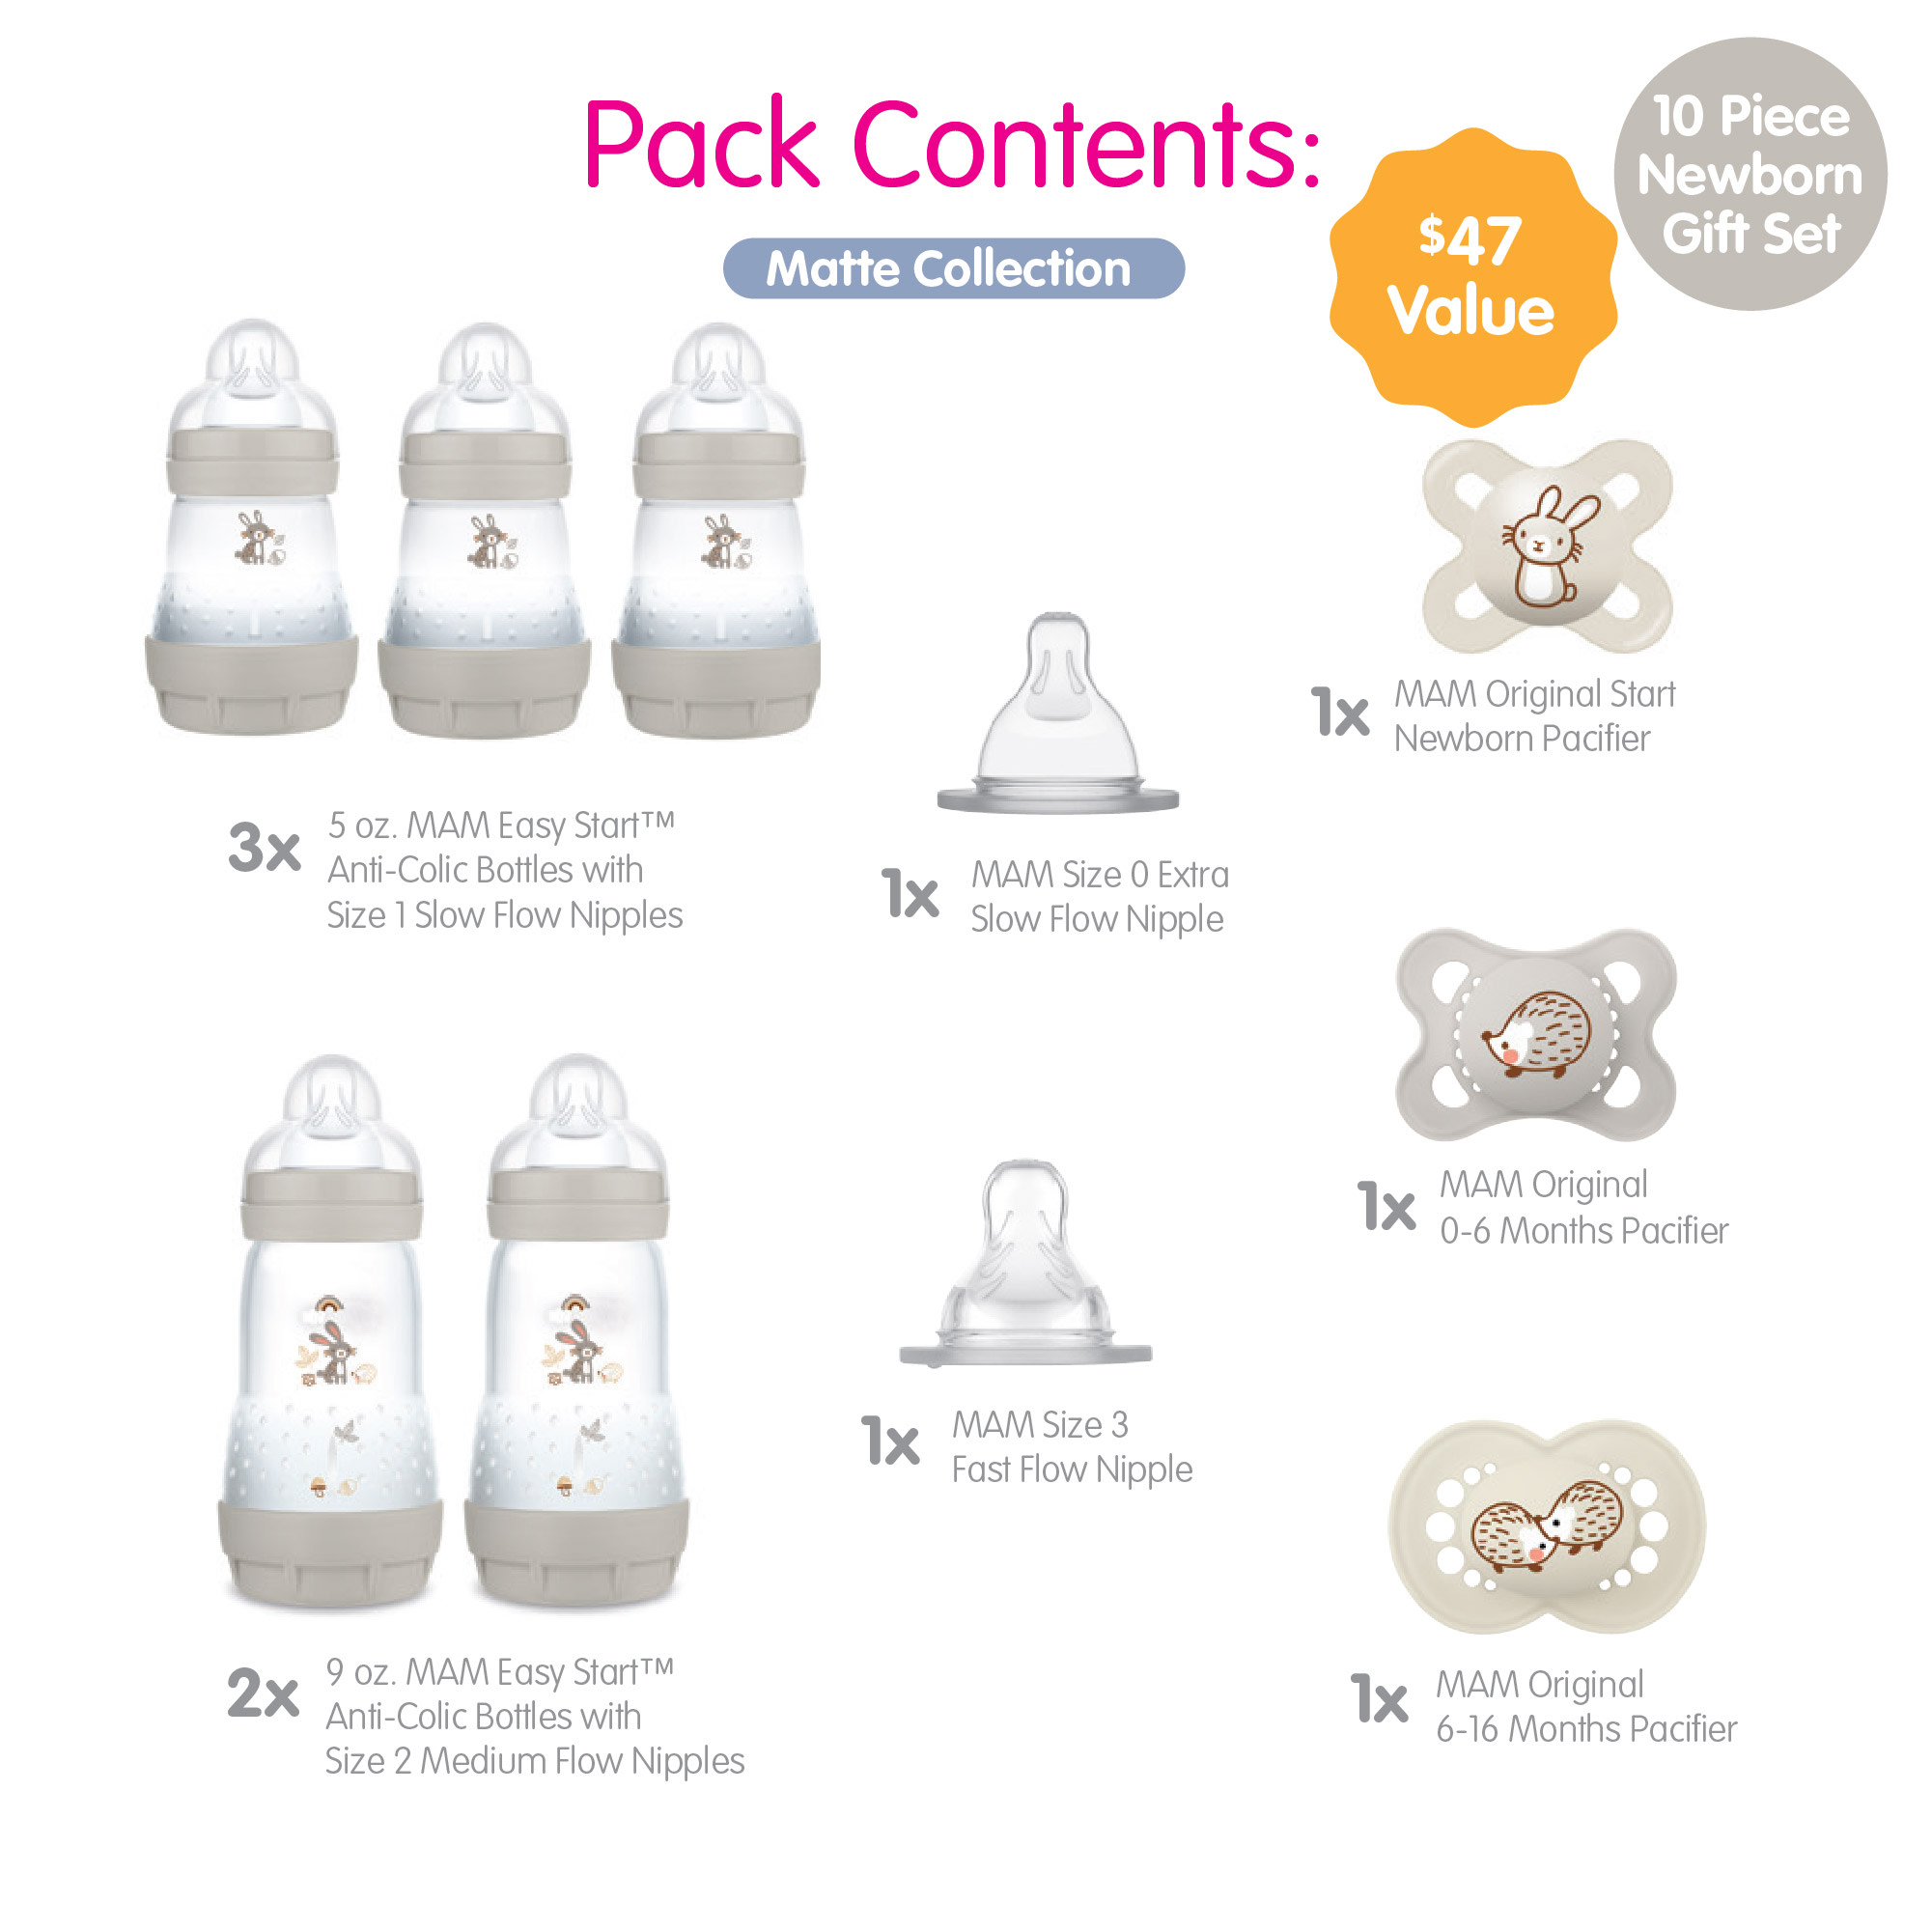 MAM Baby Bottle and Pacifier Matte Gift Set, Unisex, 10 Pack - image 2 of 9